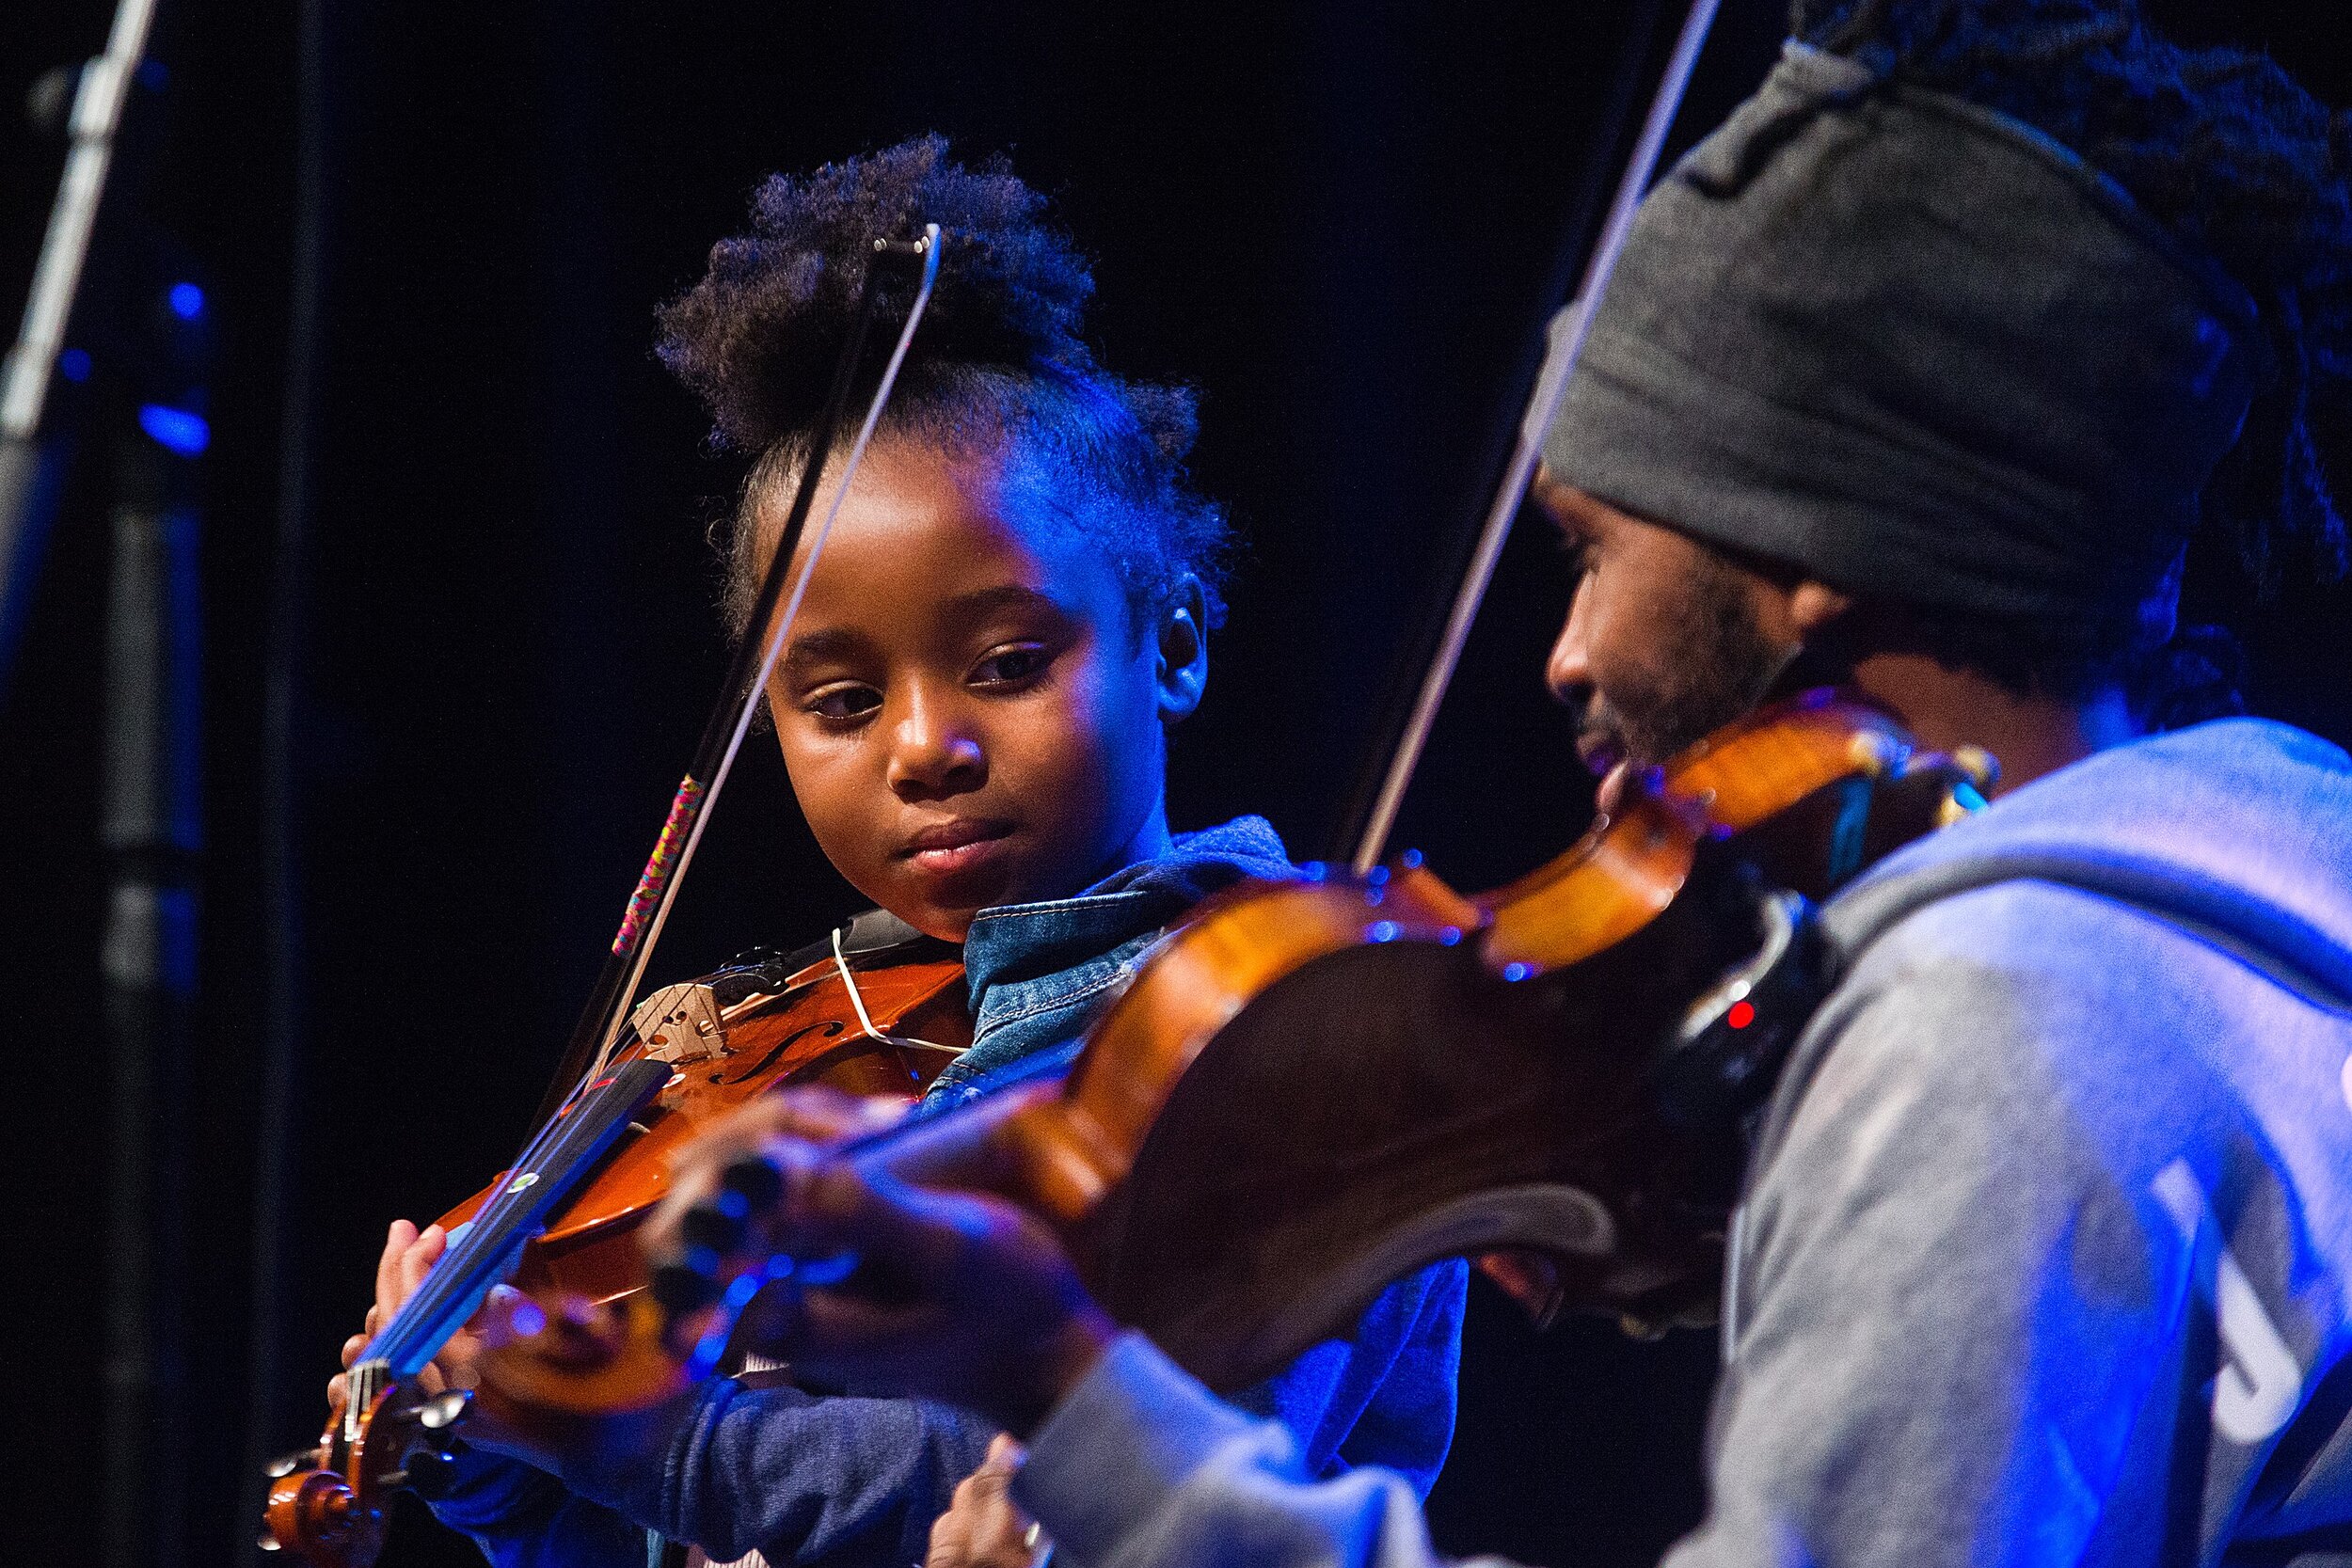  Genesis Rials, 6, participates in a play-along with Lee England Jr. during his soundcheck Saturday, April 13, 2019, at the Castle Theatre in Bloomington, Illinois. Area families were invited to the soundcheck by the Jule Foundation, a nonprofit orga